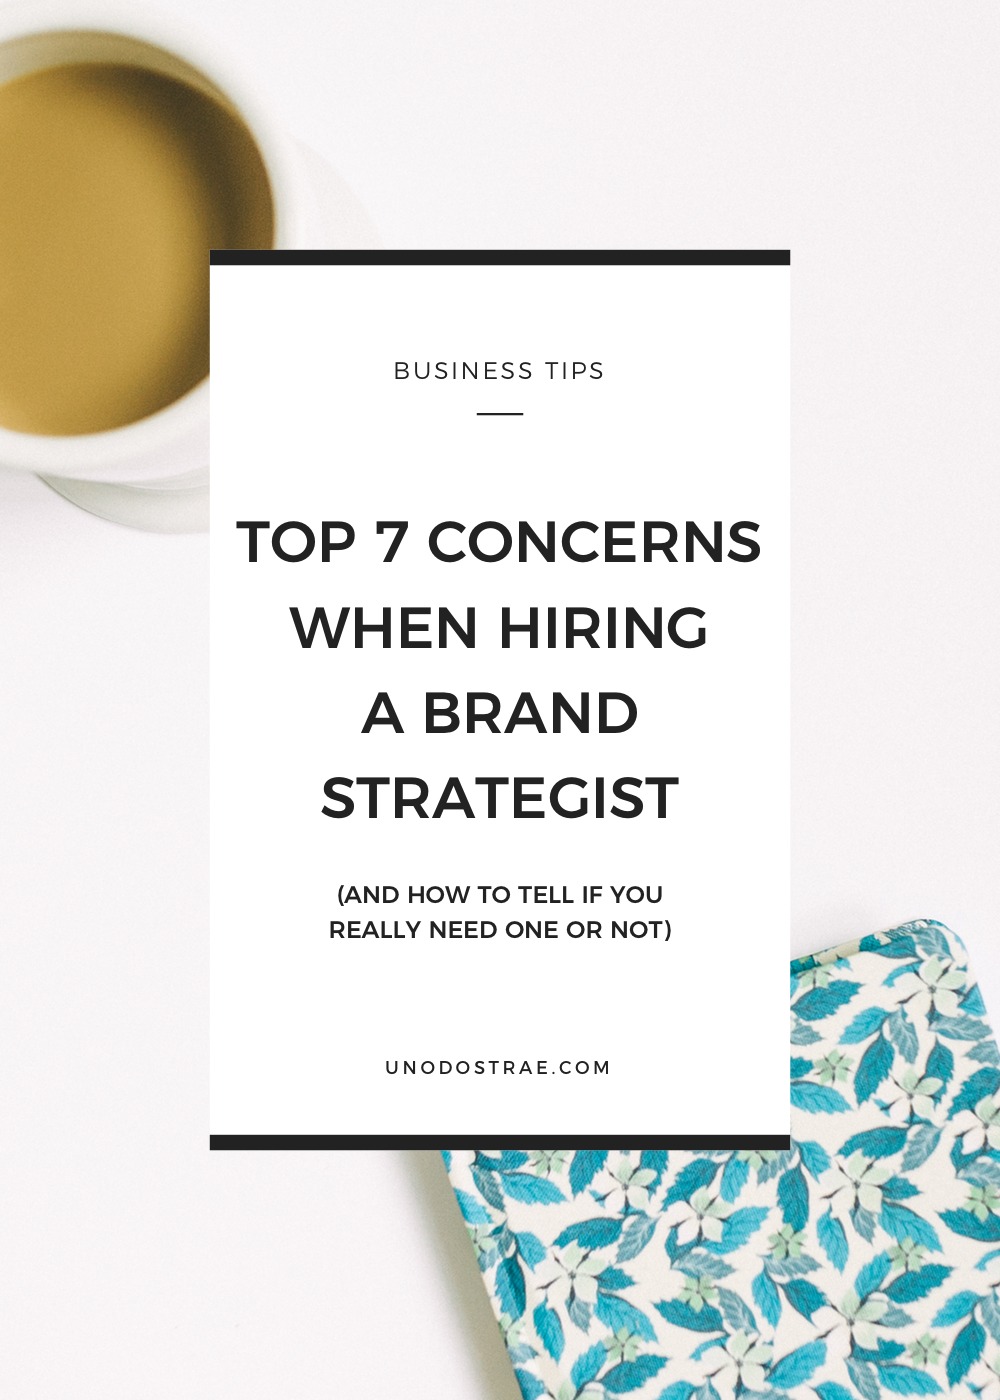 Top 7 Concerns When Hiring A Brand Strategist for Your Business | unodostrae.com